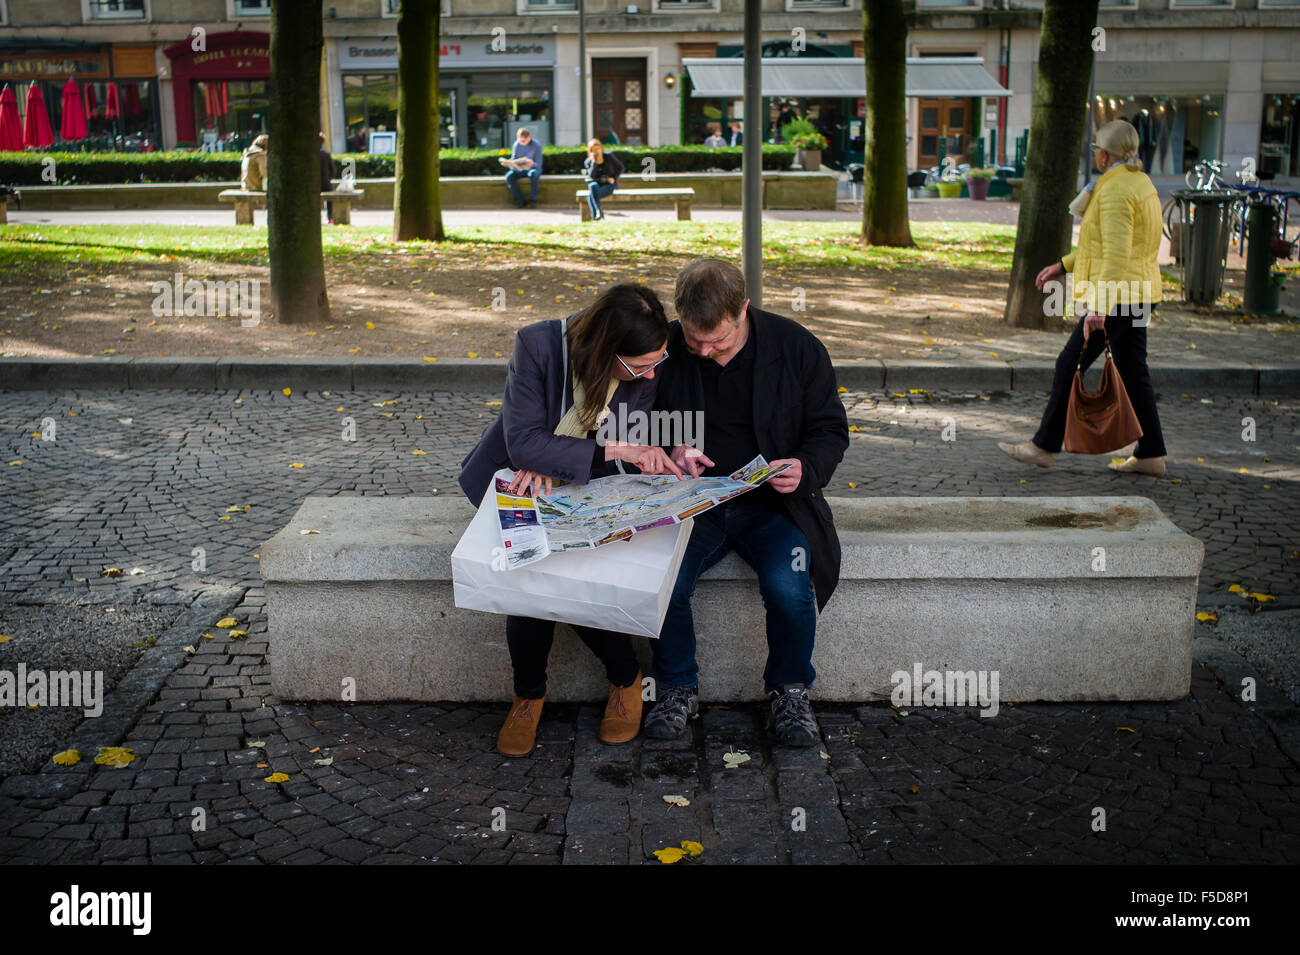 Two people sit and study a map in the precepts of Rouen Cathedral, Normandy, France. Stock Photo